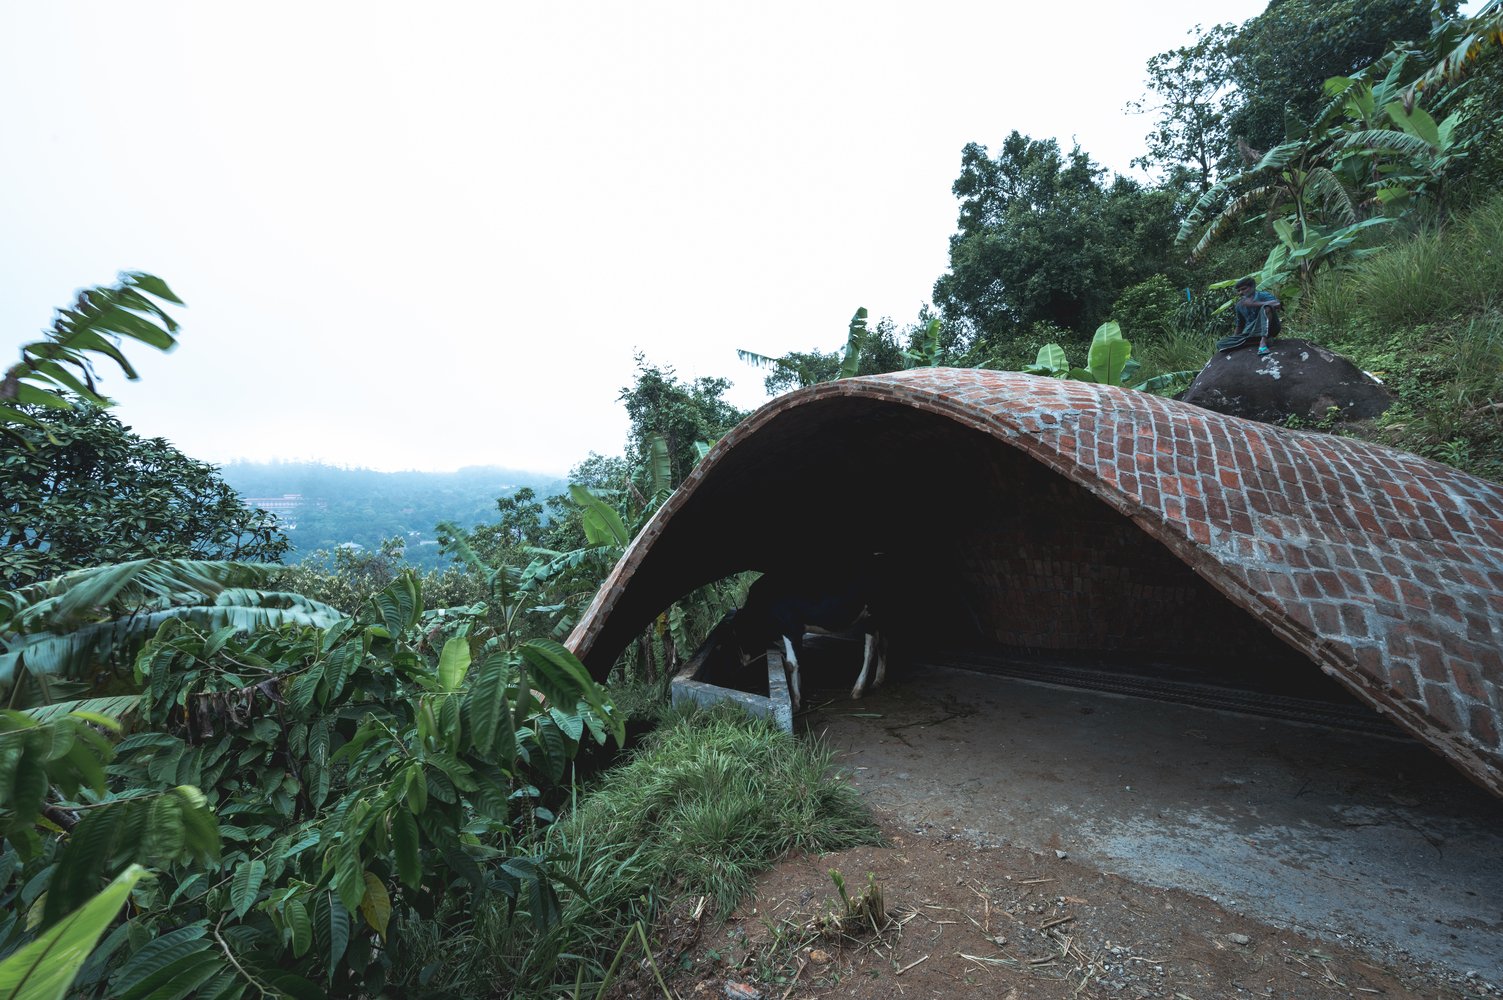 The dome is built with local bricks construction called Sithu kal